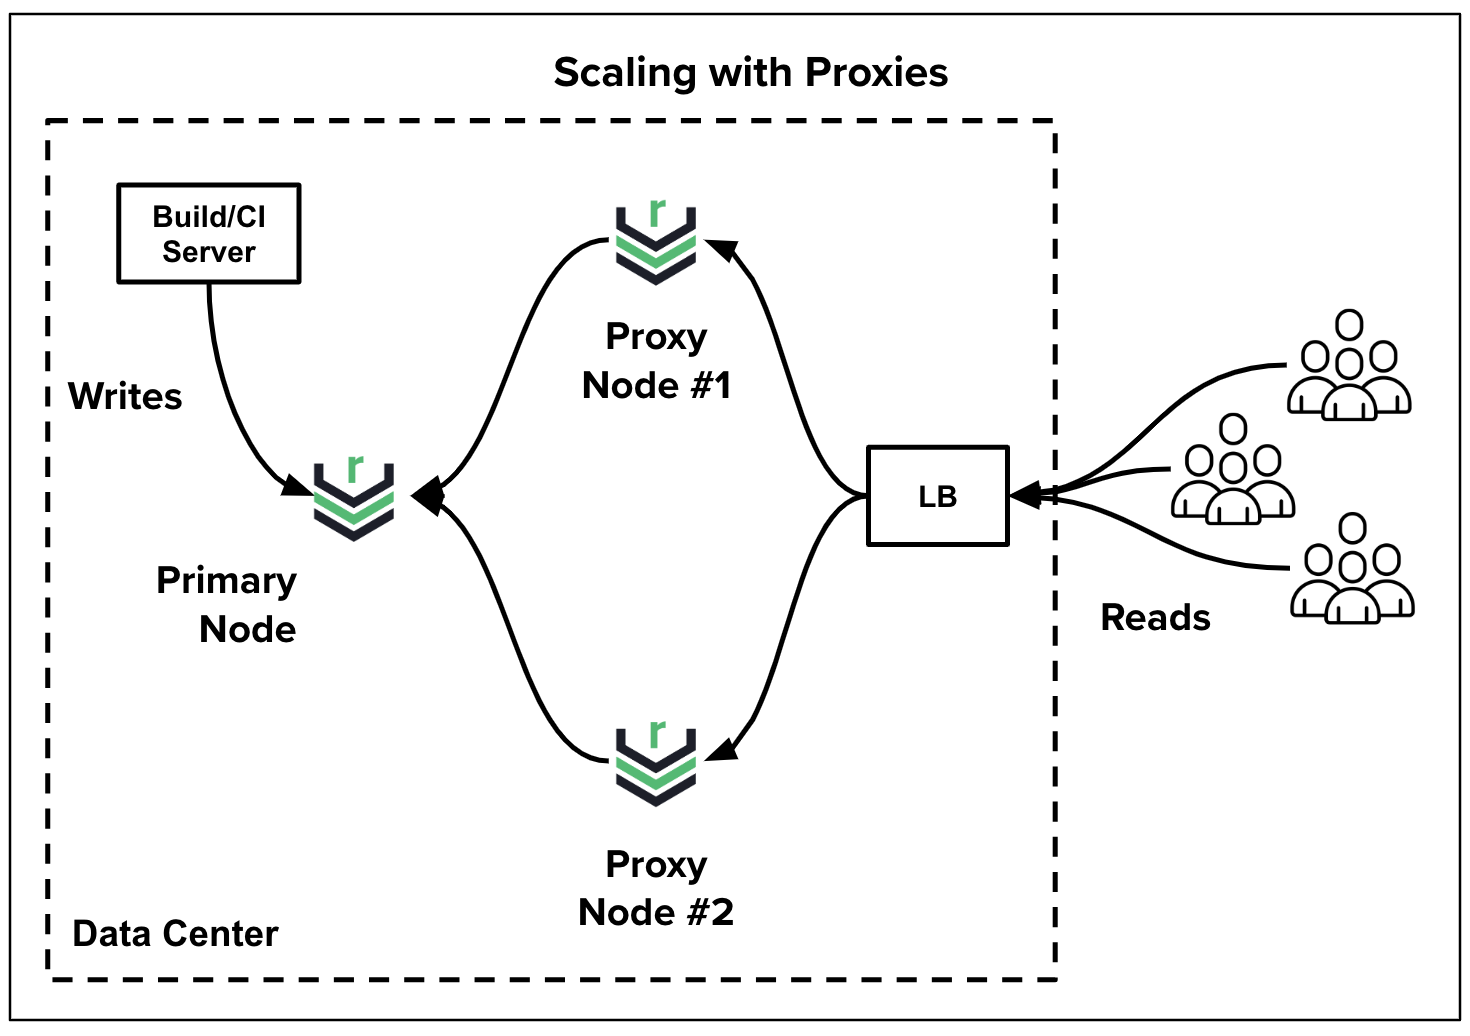 Scaling with proxies